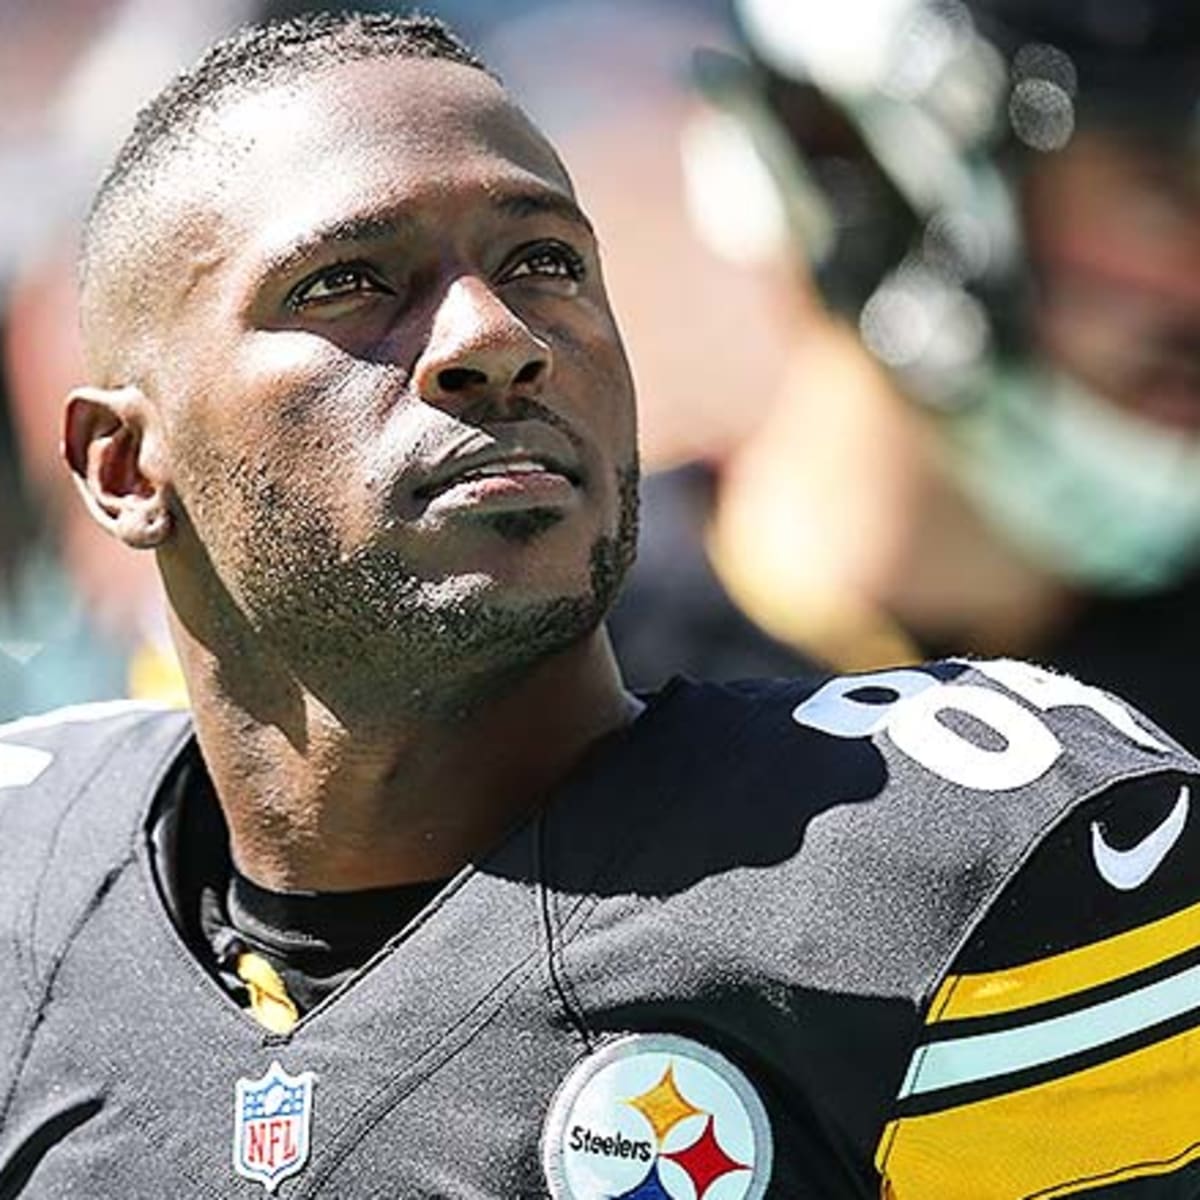 Former Steelers Great Antonio Brown Has The Audacity To Suggest He